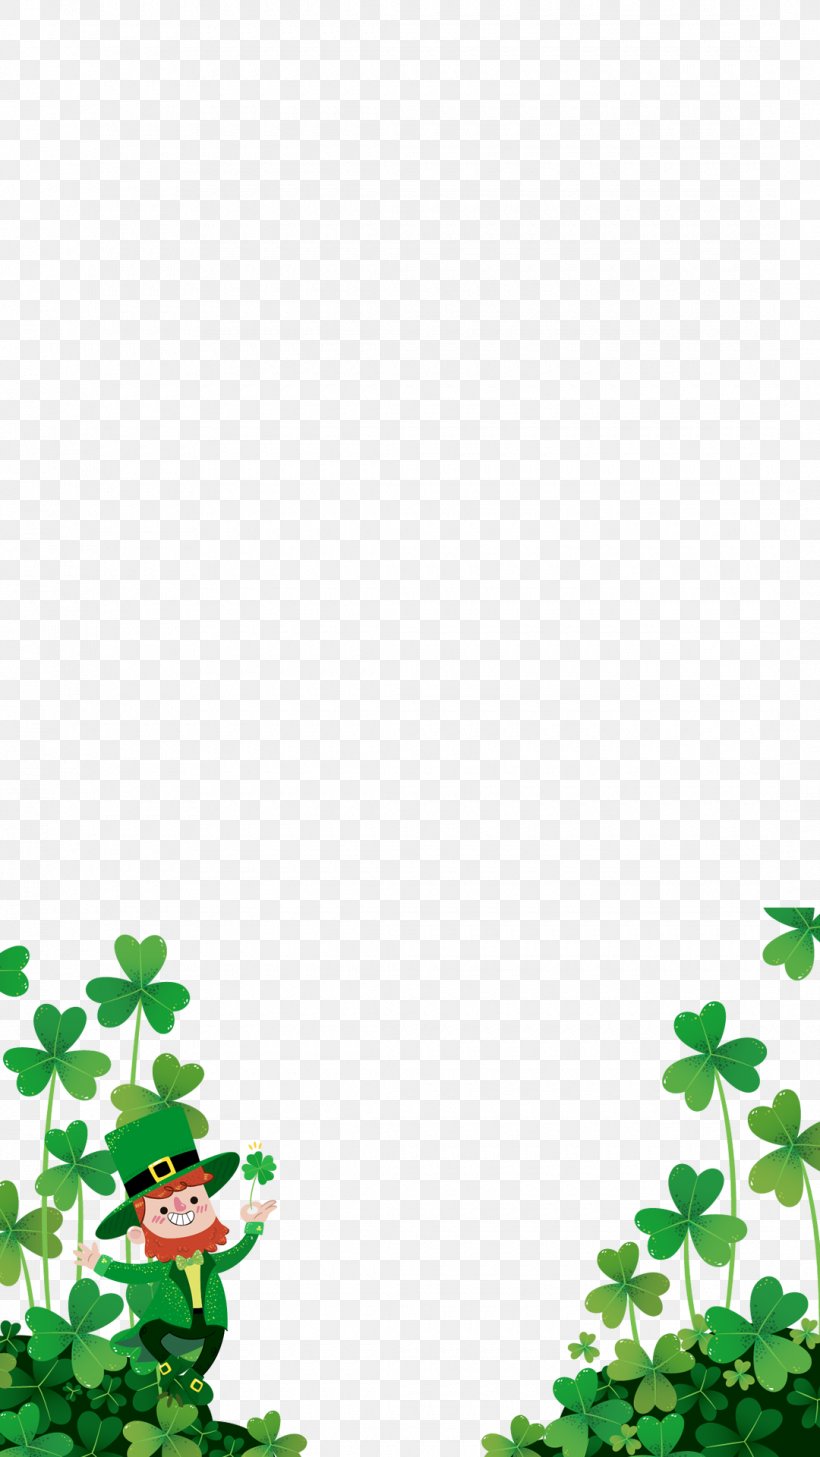 Saint Patrick's Day The Event Shed Clothing Infant Romper Suit, PNG, 1080x1920px, Saint Patricks Day, Byxdress, Childrens Clothing, Clothing, Clover Download Free